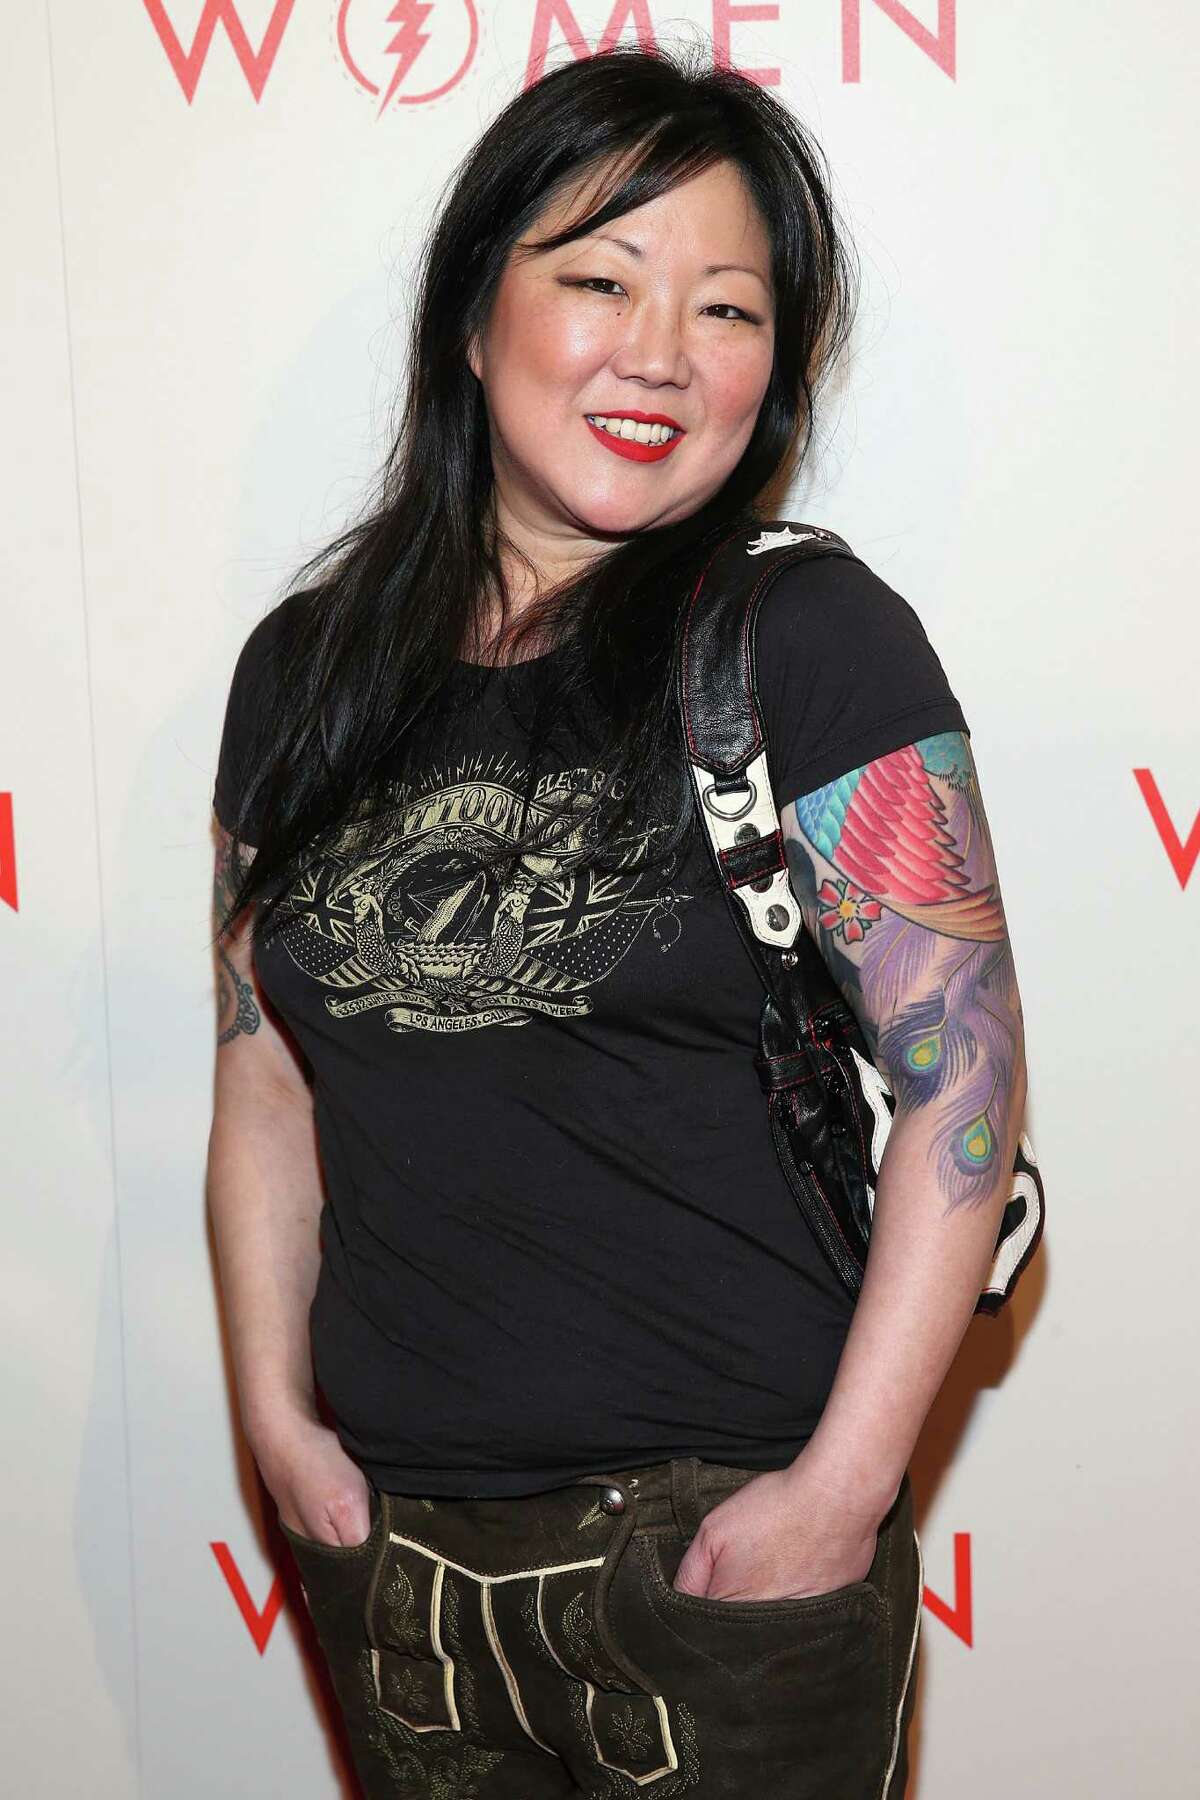 BEVERLY HILLS, CA - MAY 10: Actress Margaret Cho attends The L.A. Gay & Lesbian Center's 2014 An Evening With Women (AEWW) at The Beverly Hilton Hotel on May 10, 2014.